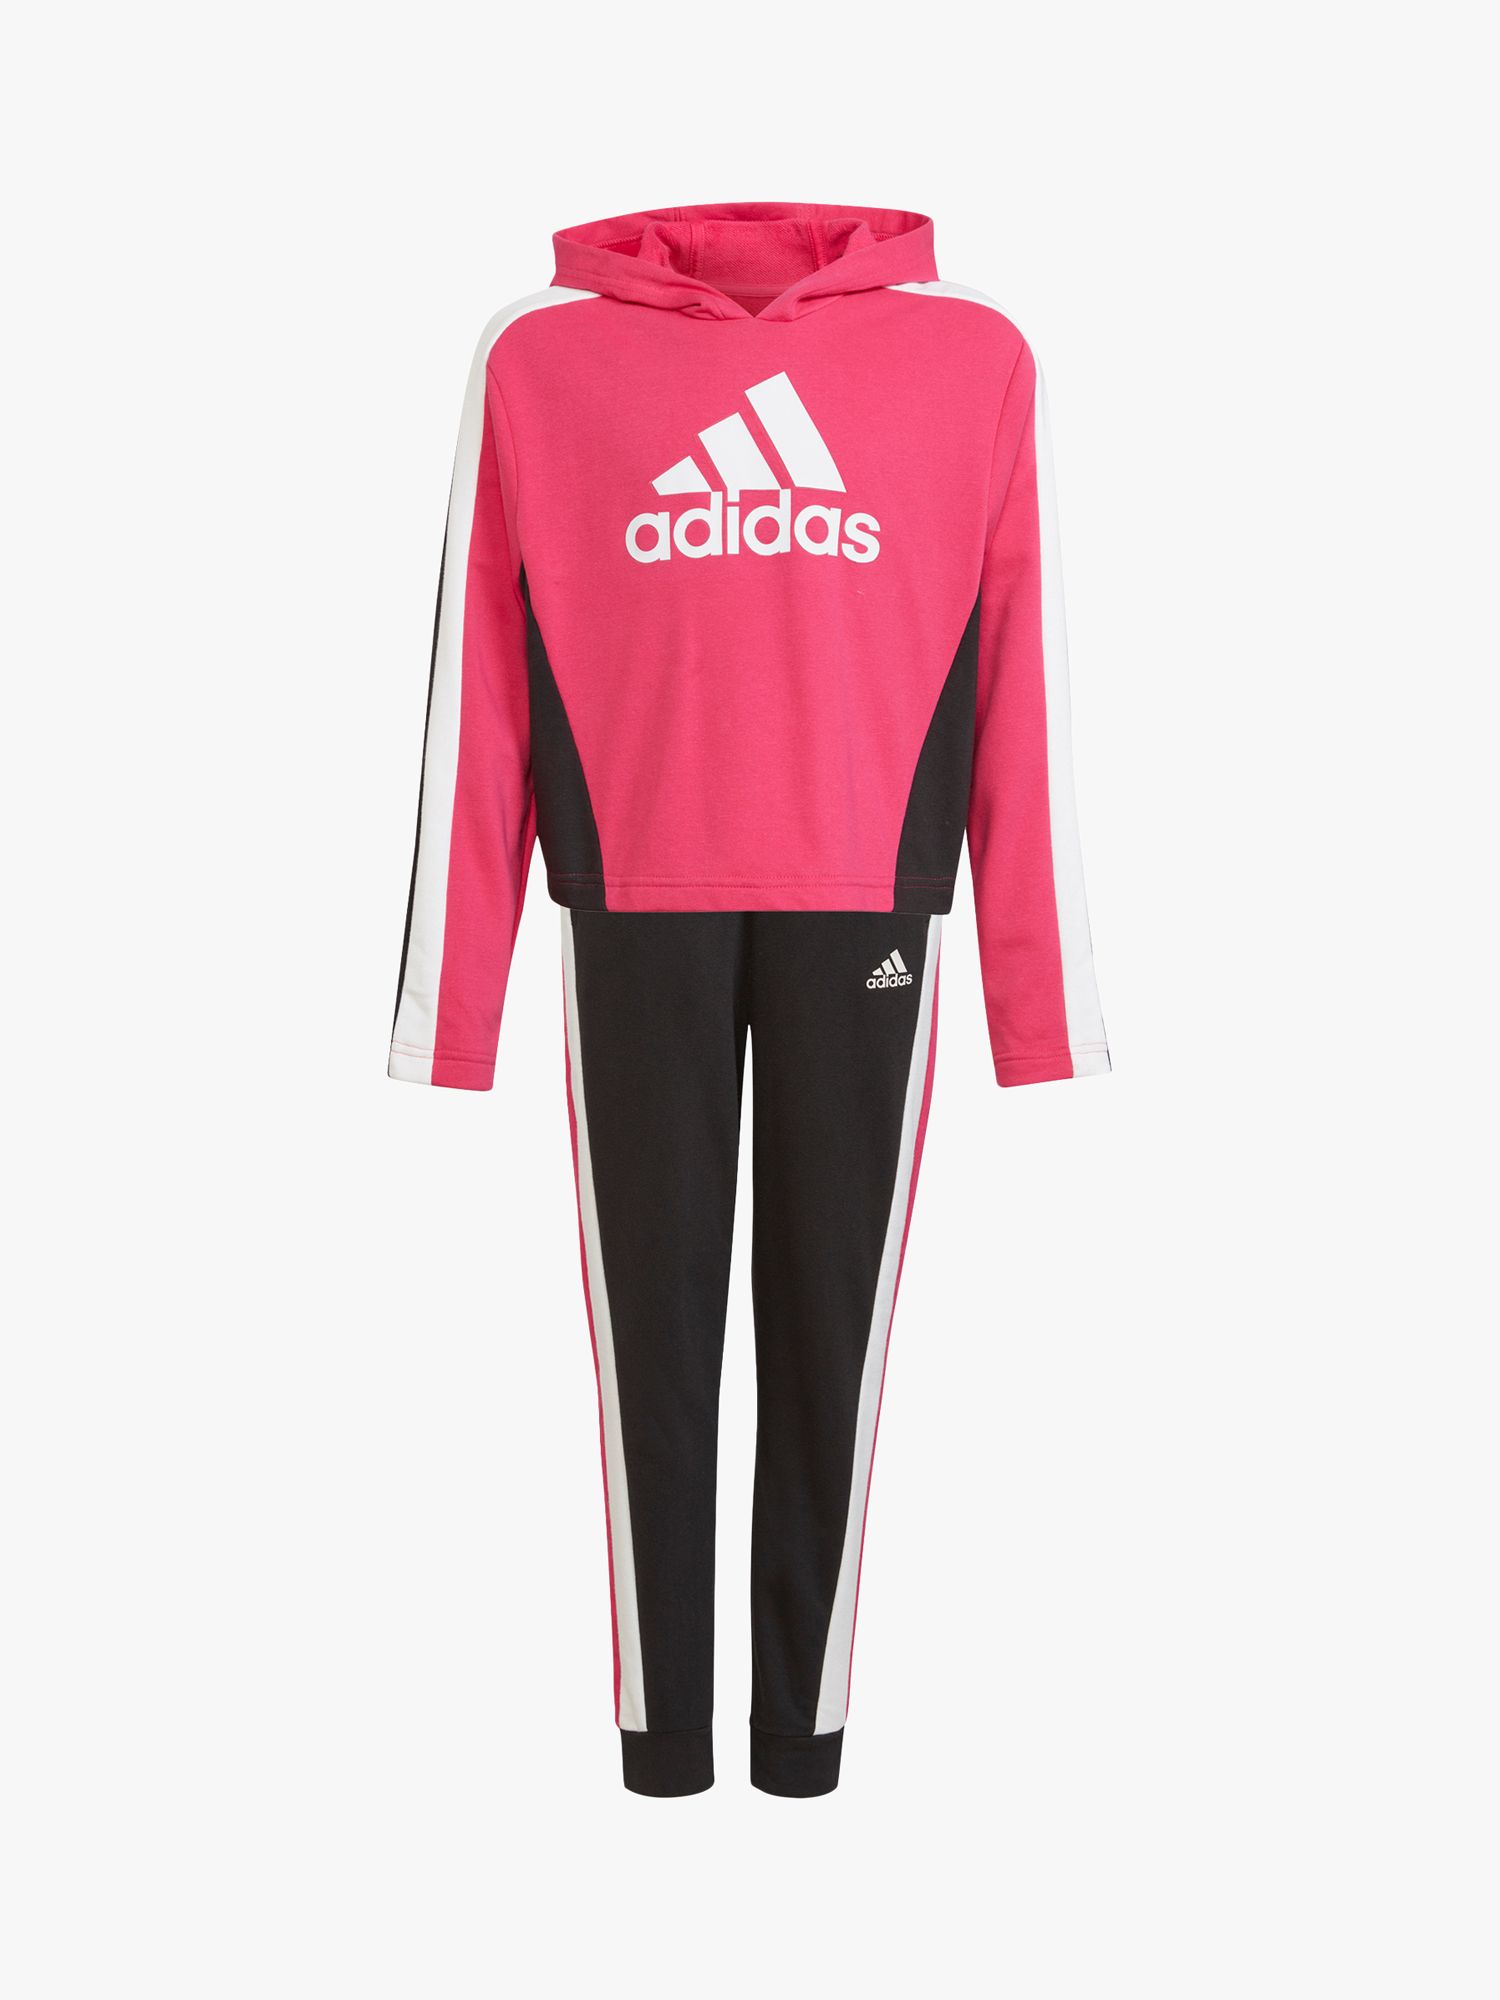 adidas Children's Cropped Hoodie Tracksuit Magenta/Black 11-12 years unisex 70% cotton, 30% recycled polyester